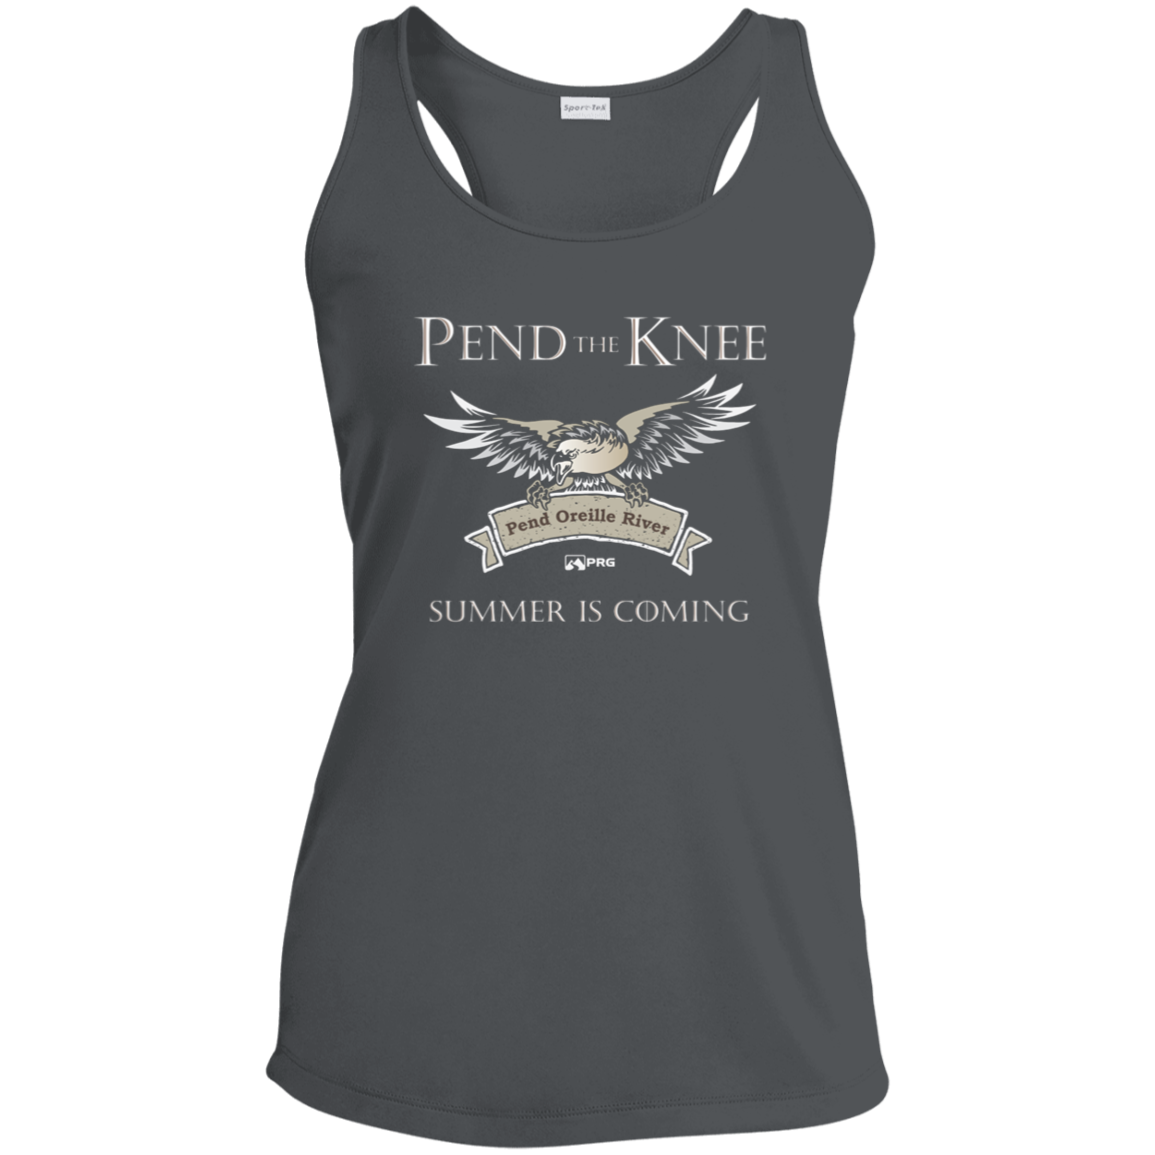 Pend the Knee - Womens Racerback